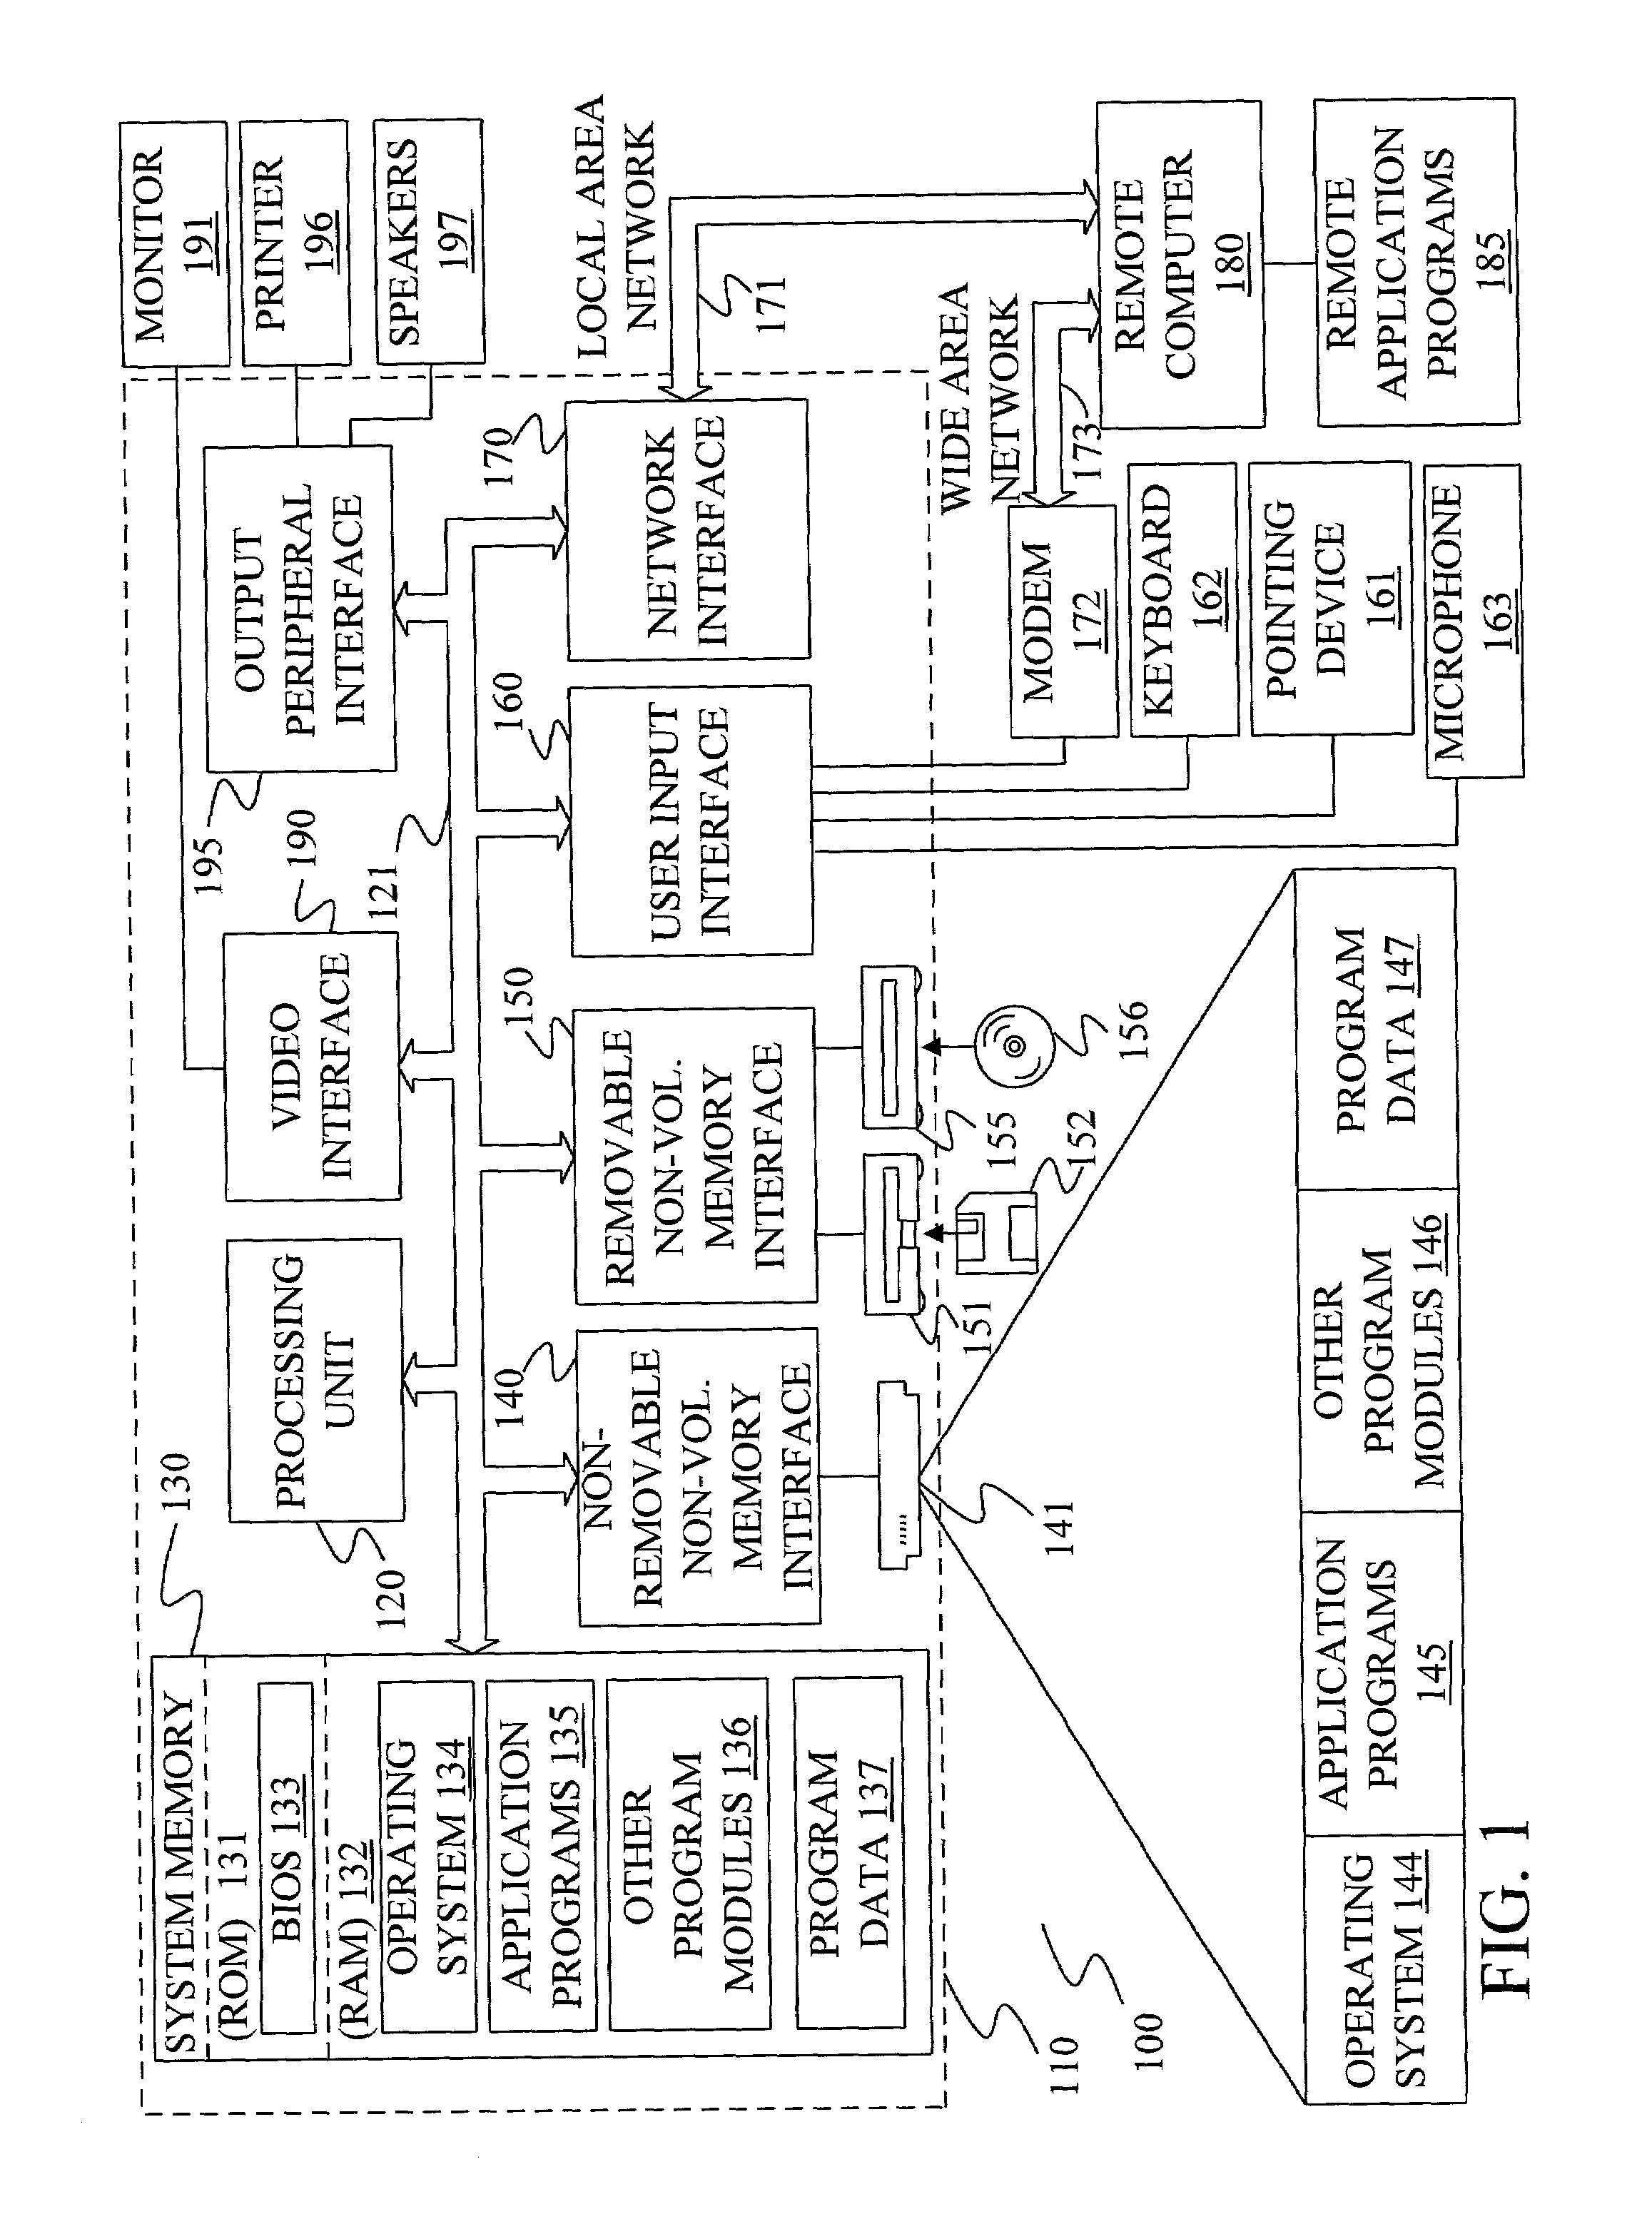 Method and apparatus for denoising and deverberation using variational inference and strong speech models